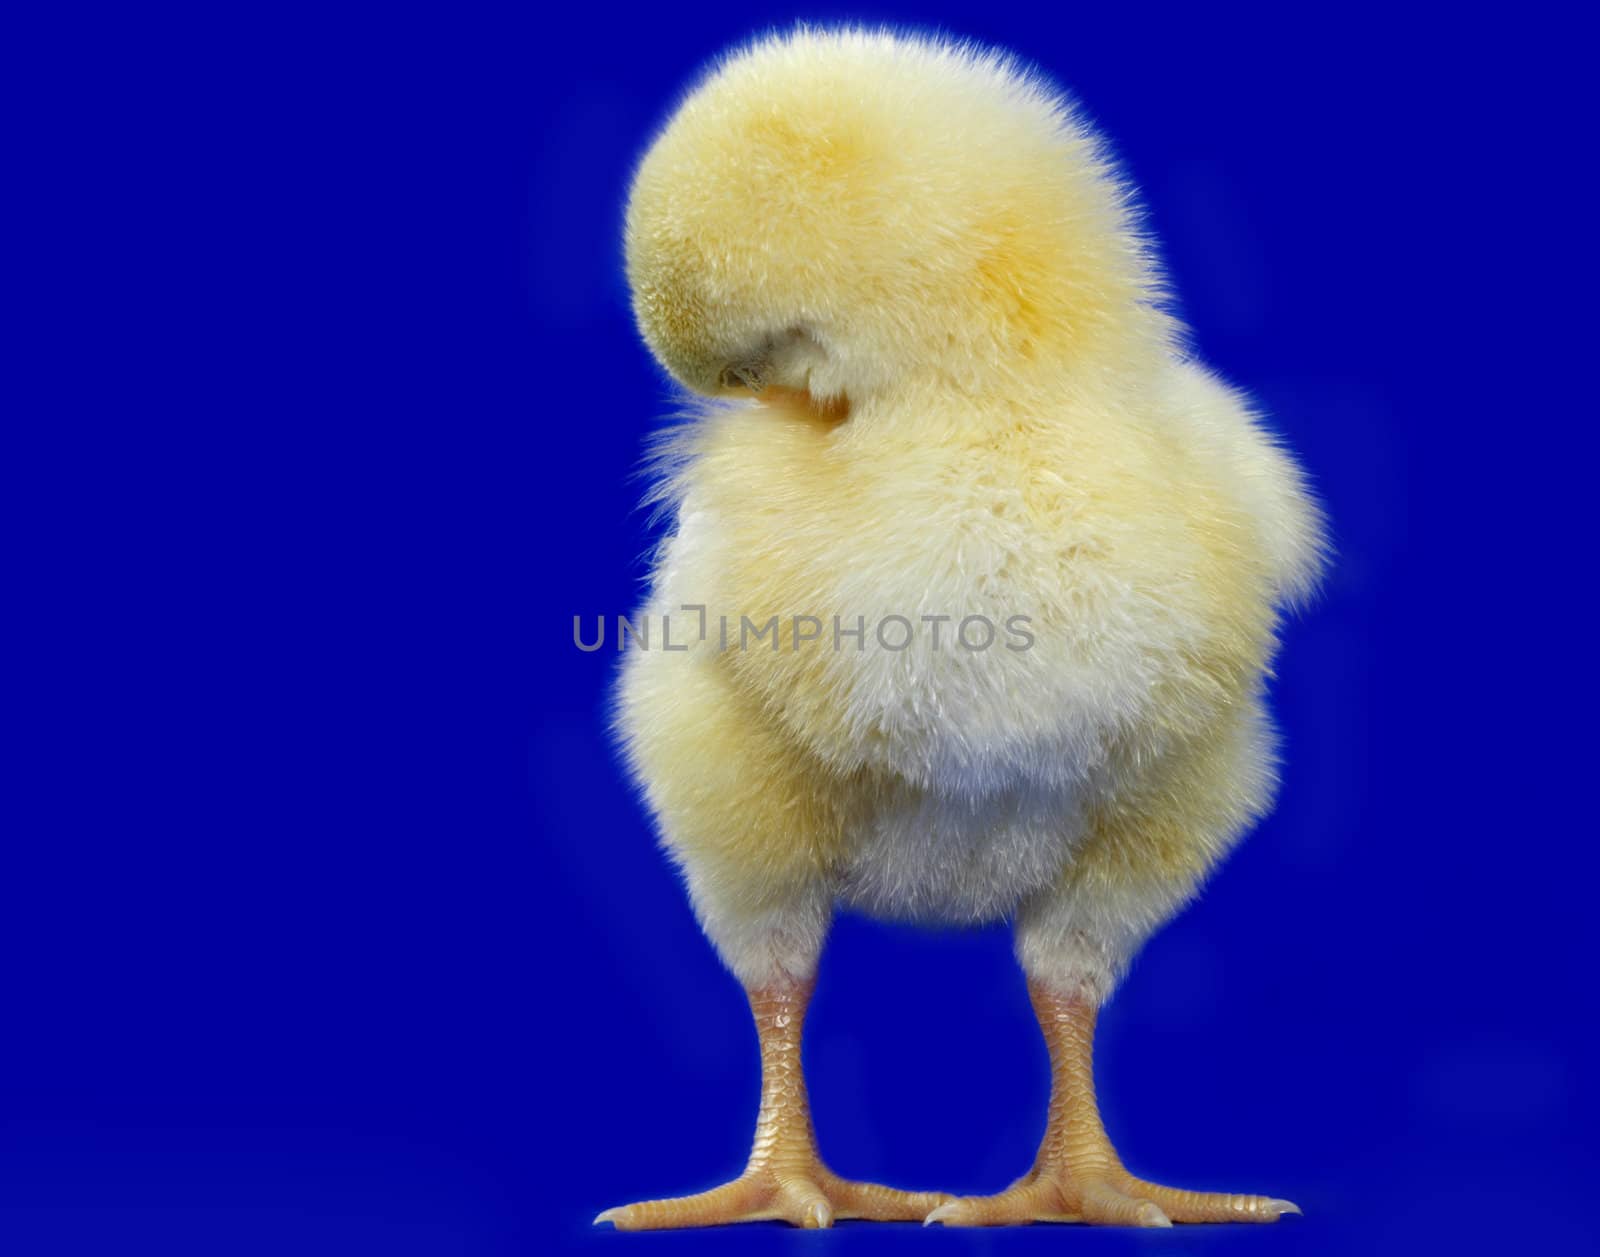 little yellow chick, blue background